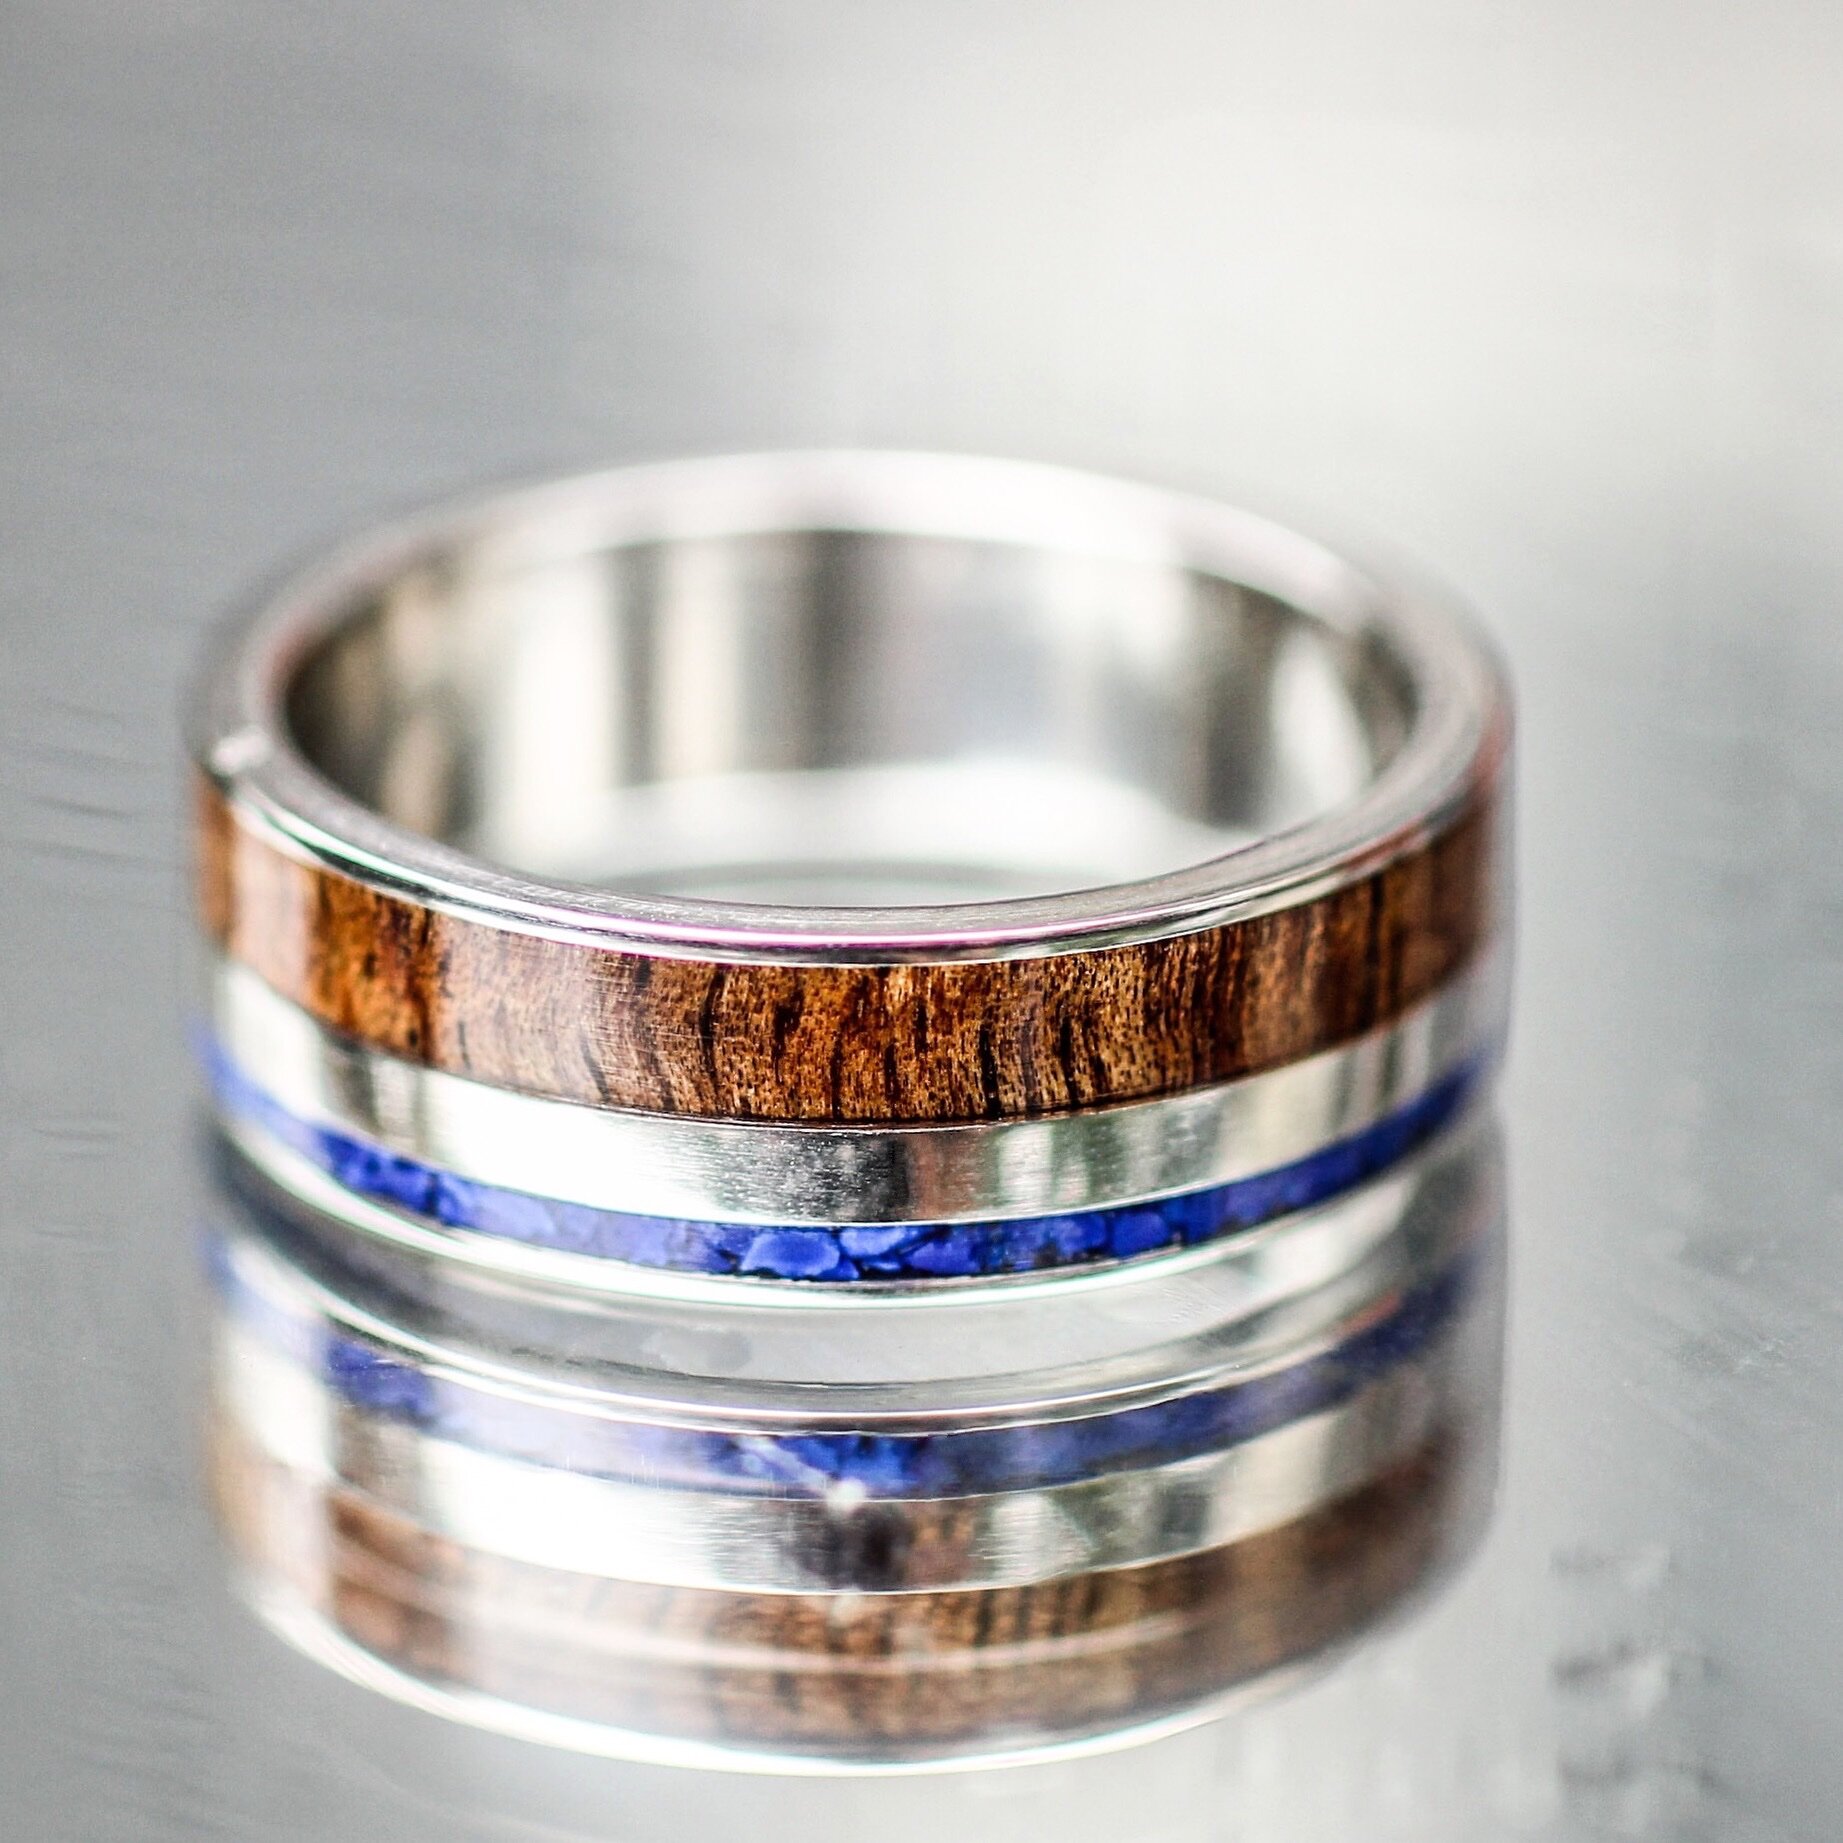 Shop Cobalt and Wood Rings